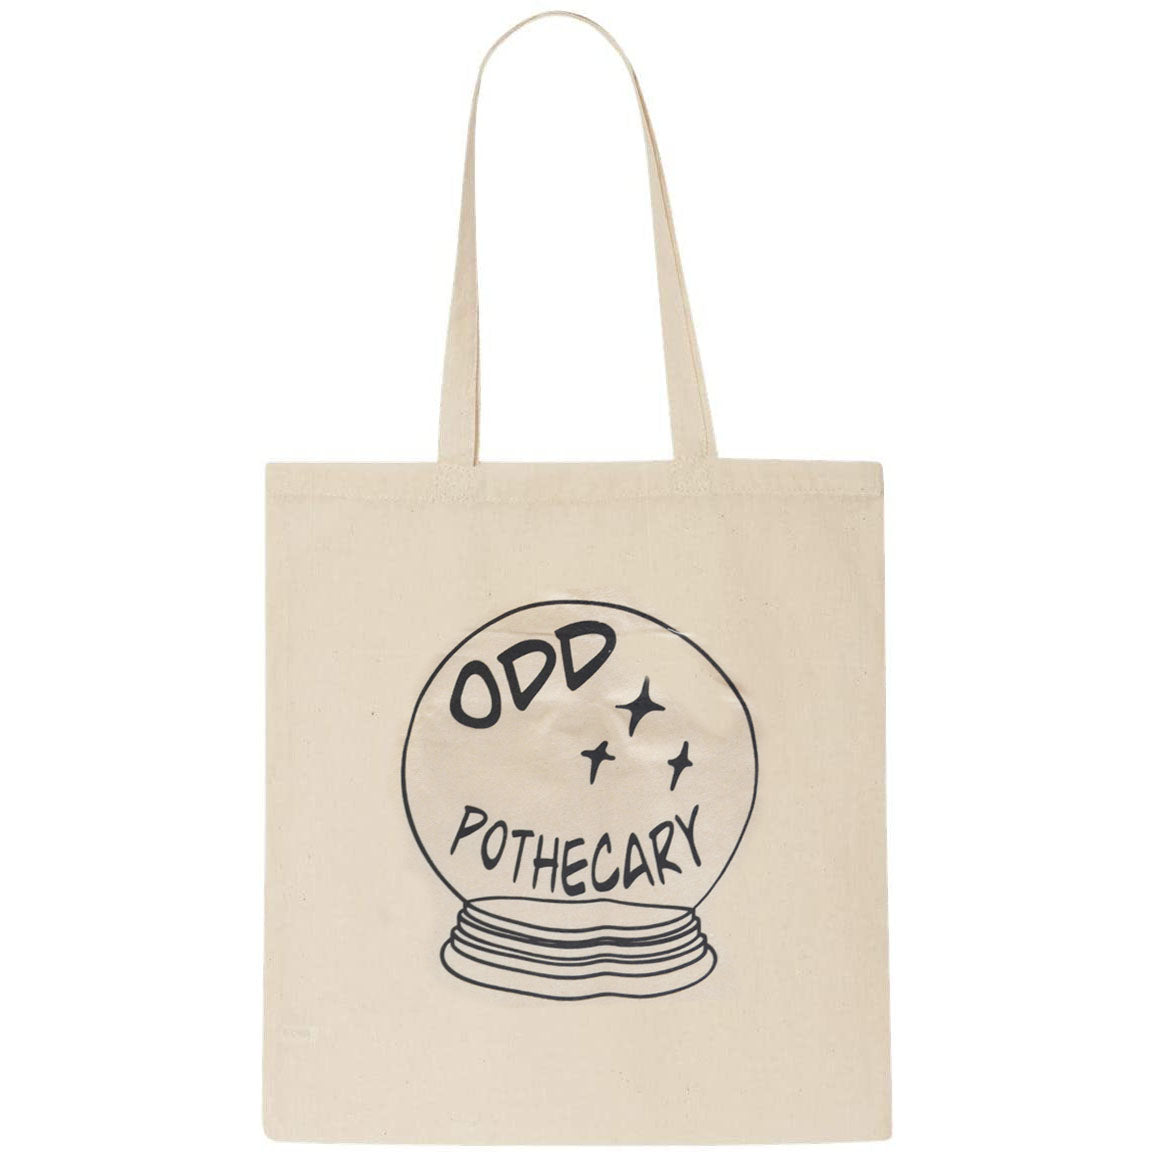 Oddpothecary Tote